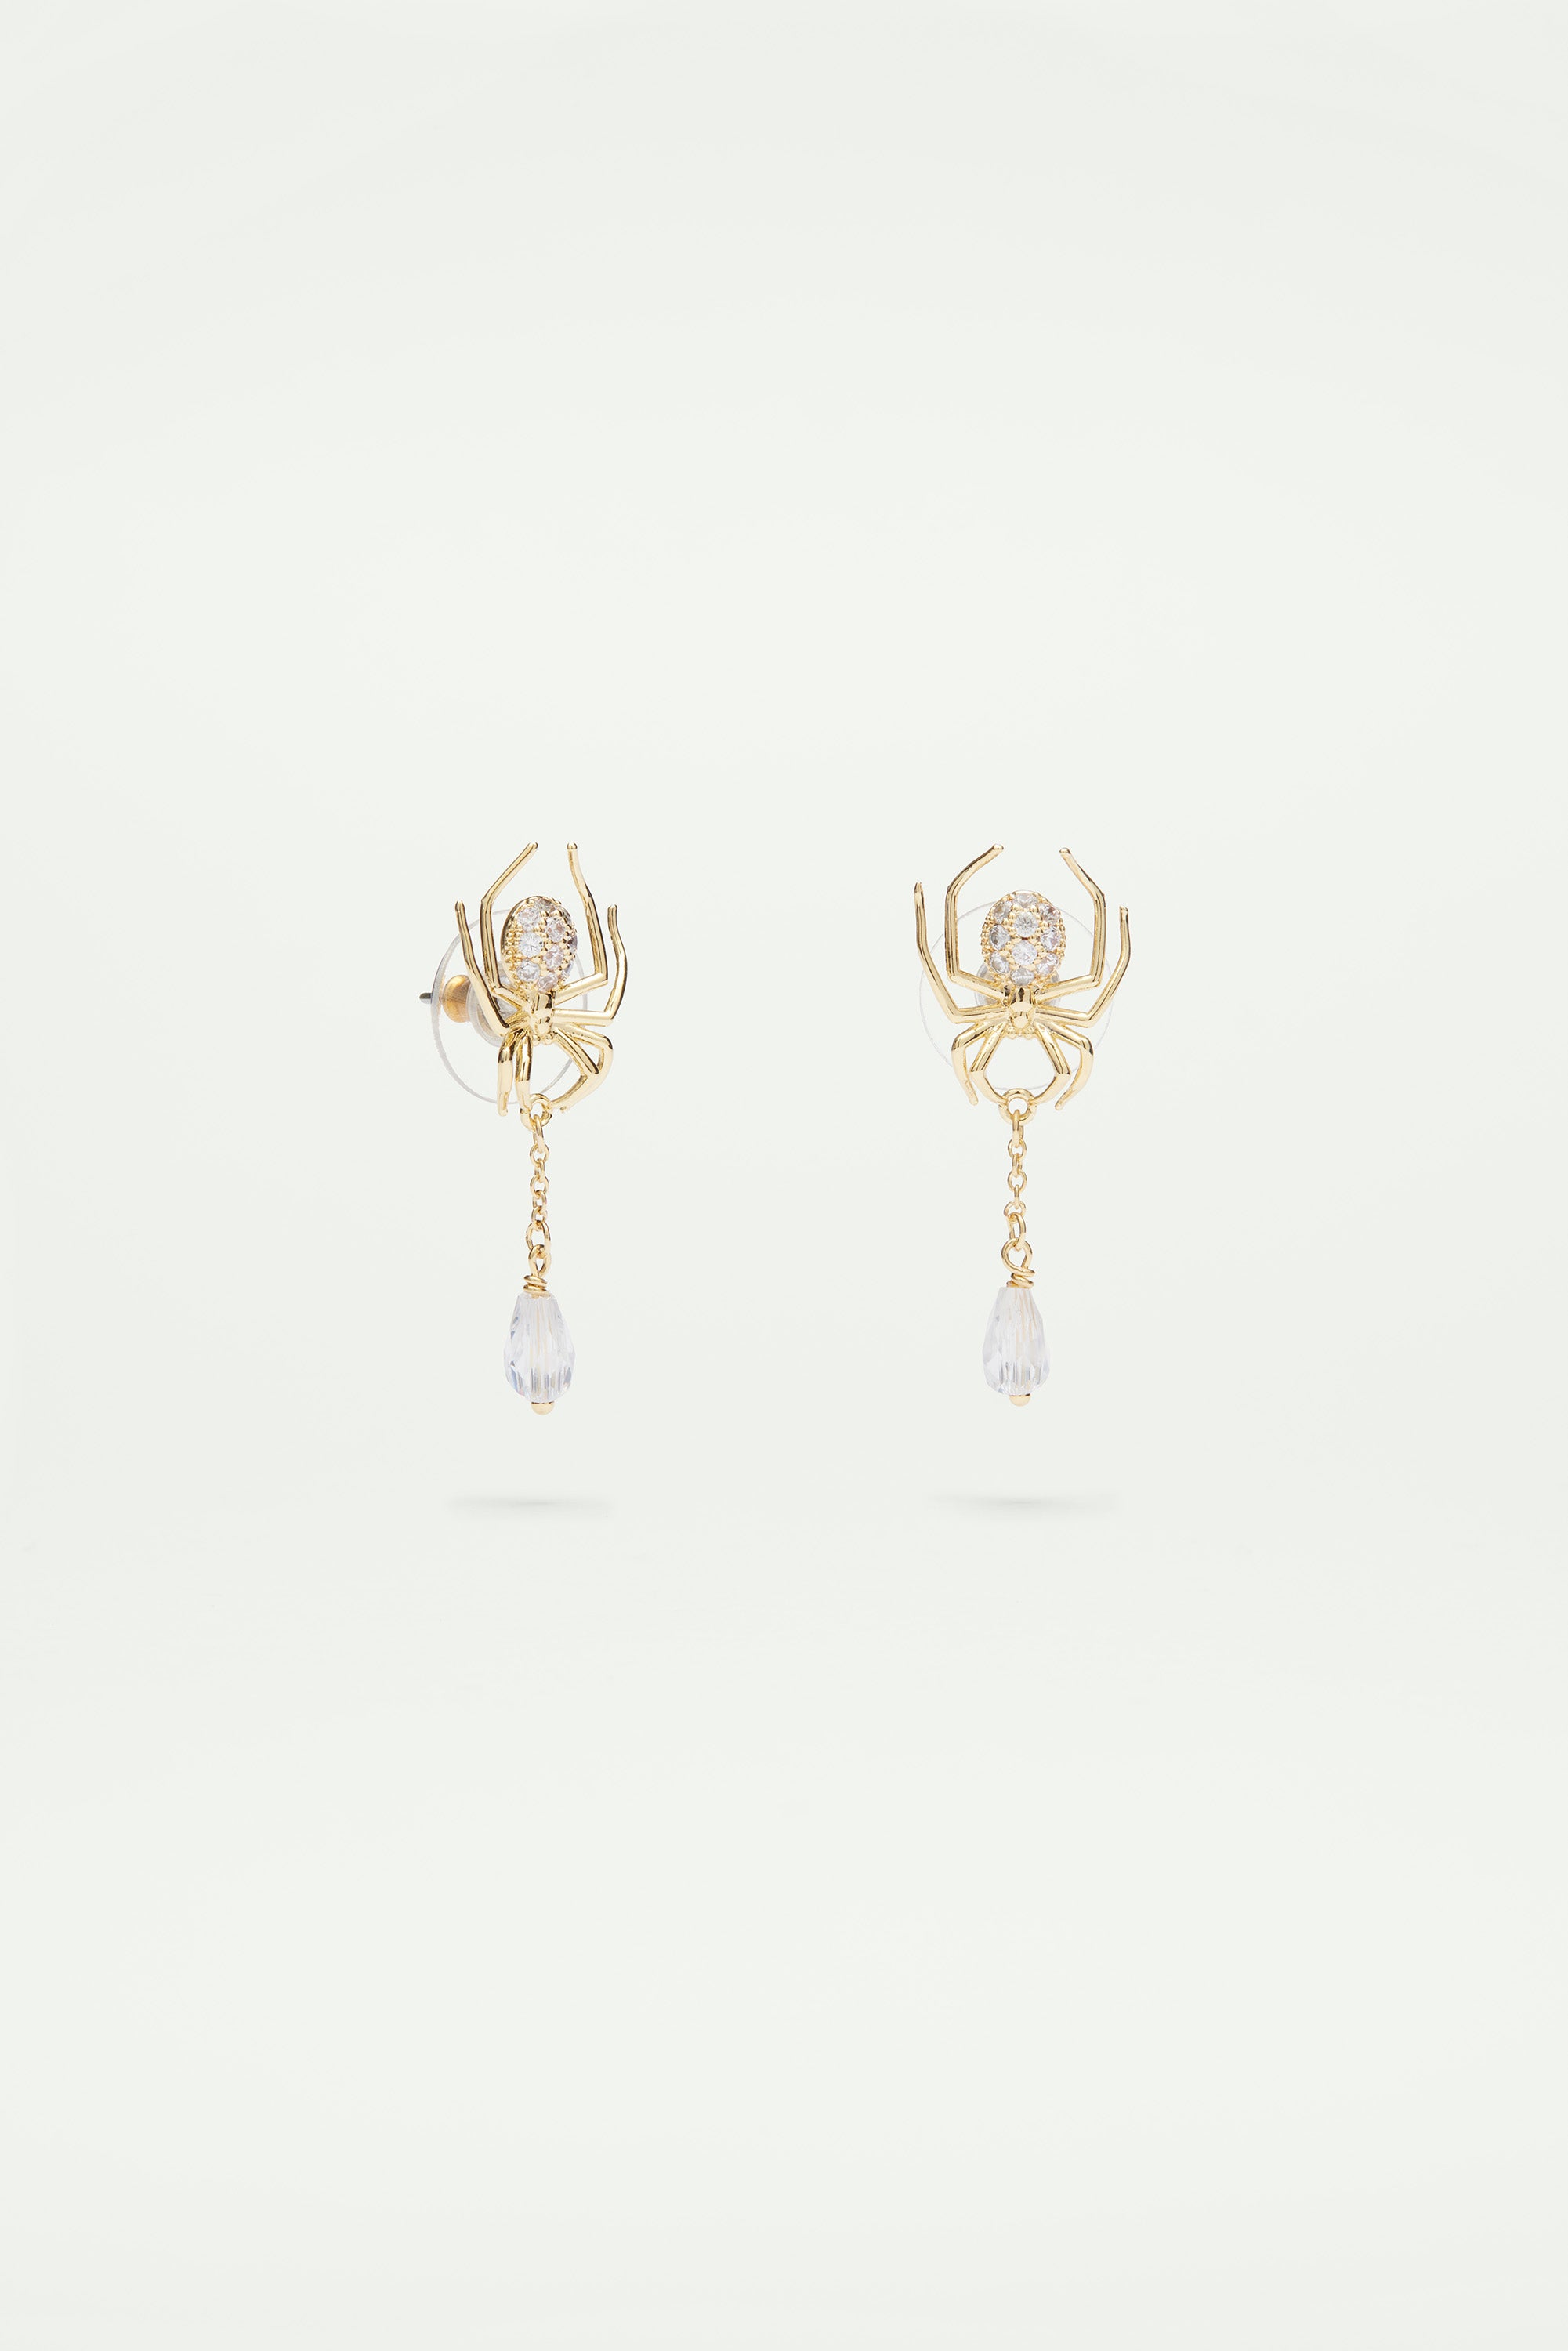 Golden spider and cut glass dangling earrings